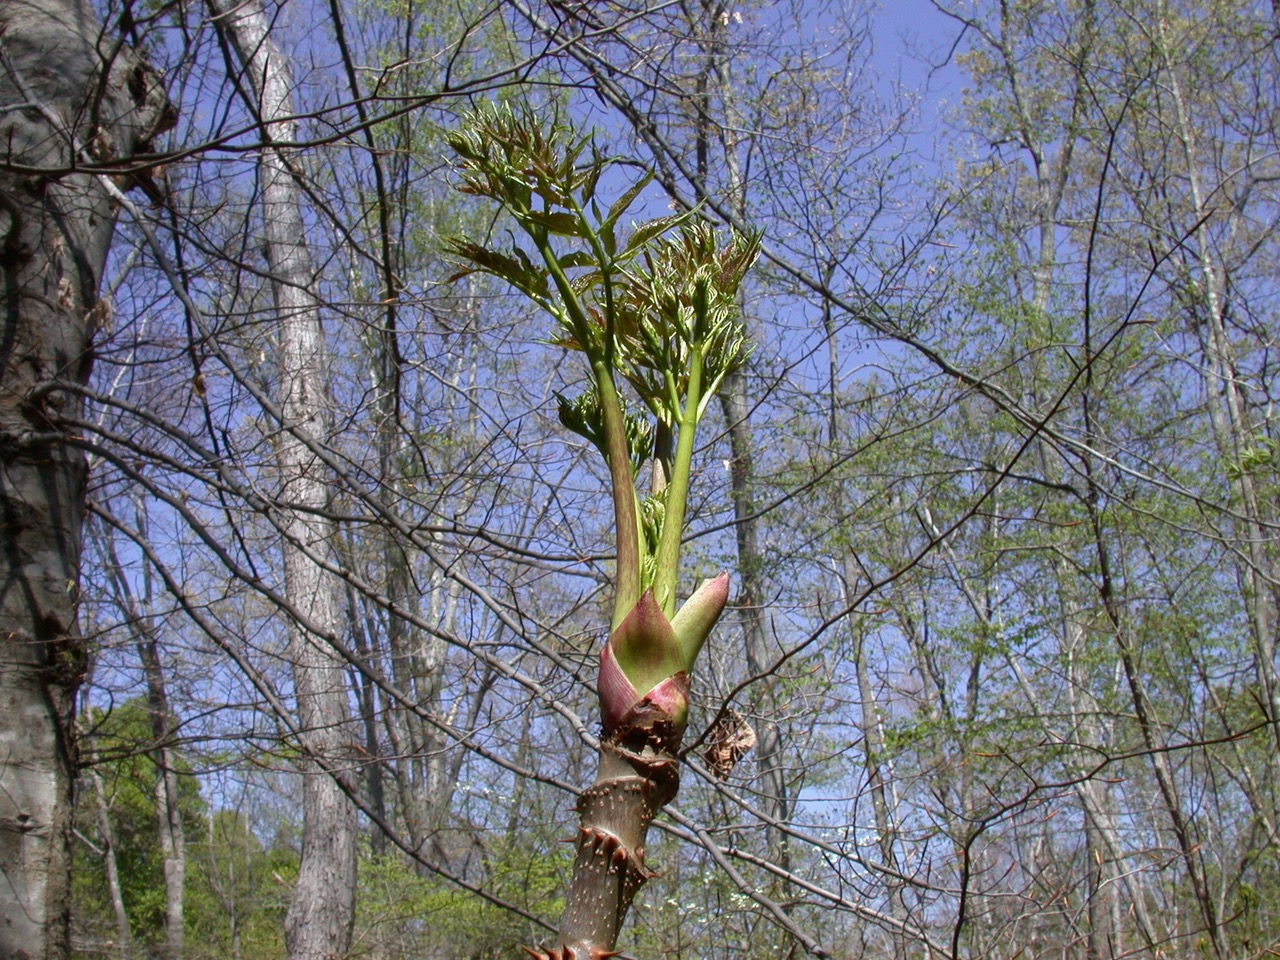 The Scientific Name is Aralia spinosa. You will likely hear them called Devil's Walkingstick, Hercules' Club, Prickly Ash. This picture shows the Leaves emerging in spring of Aralia spinosa